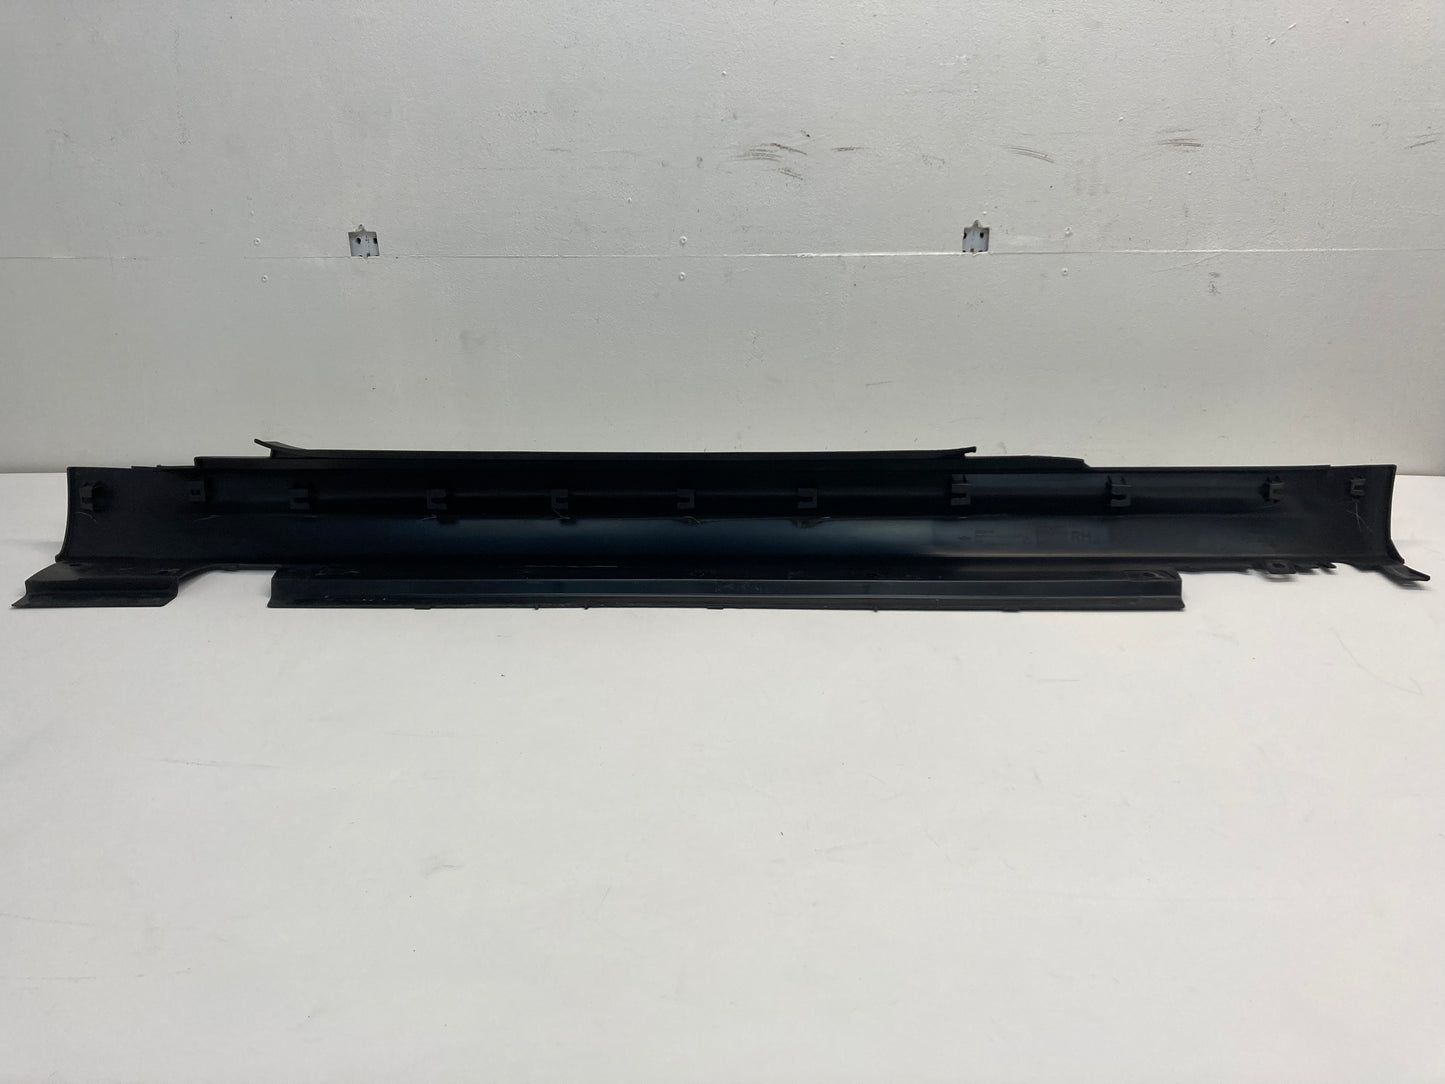 Mini Cooper Bayswater Edition Right Side Skirt Door Sill 51777147916 07-15 R56 R57 R58 R59 401